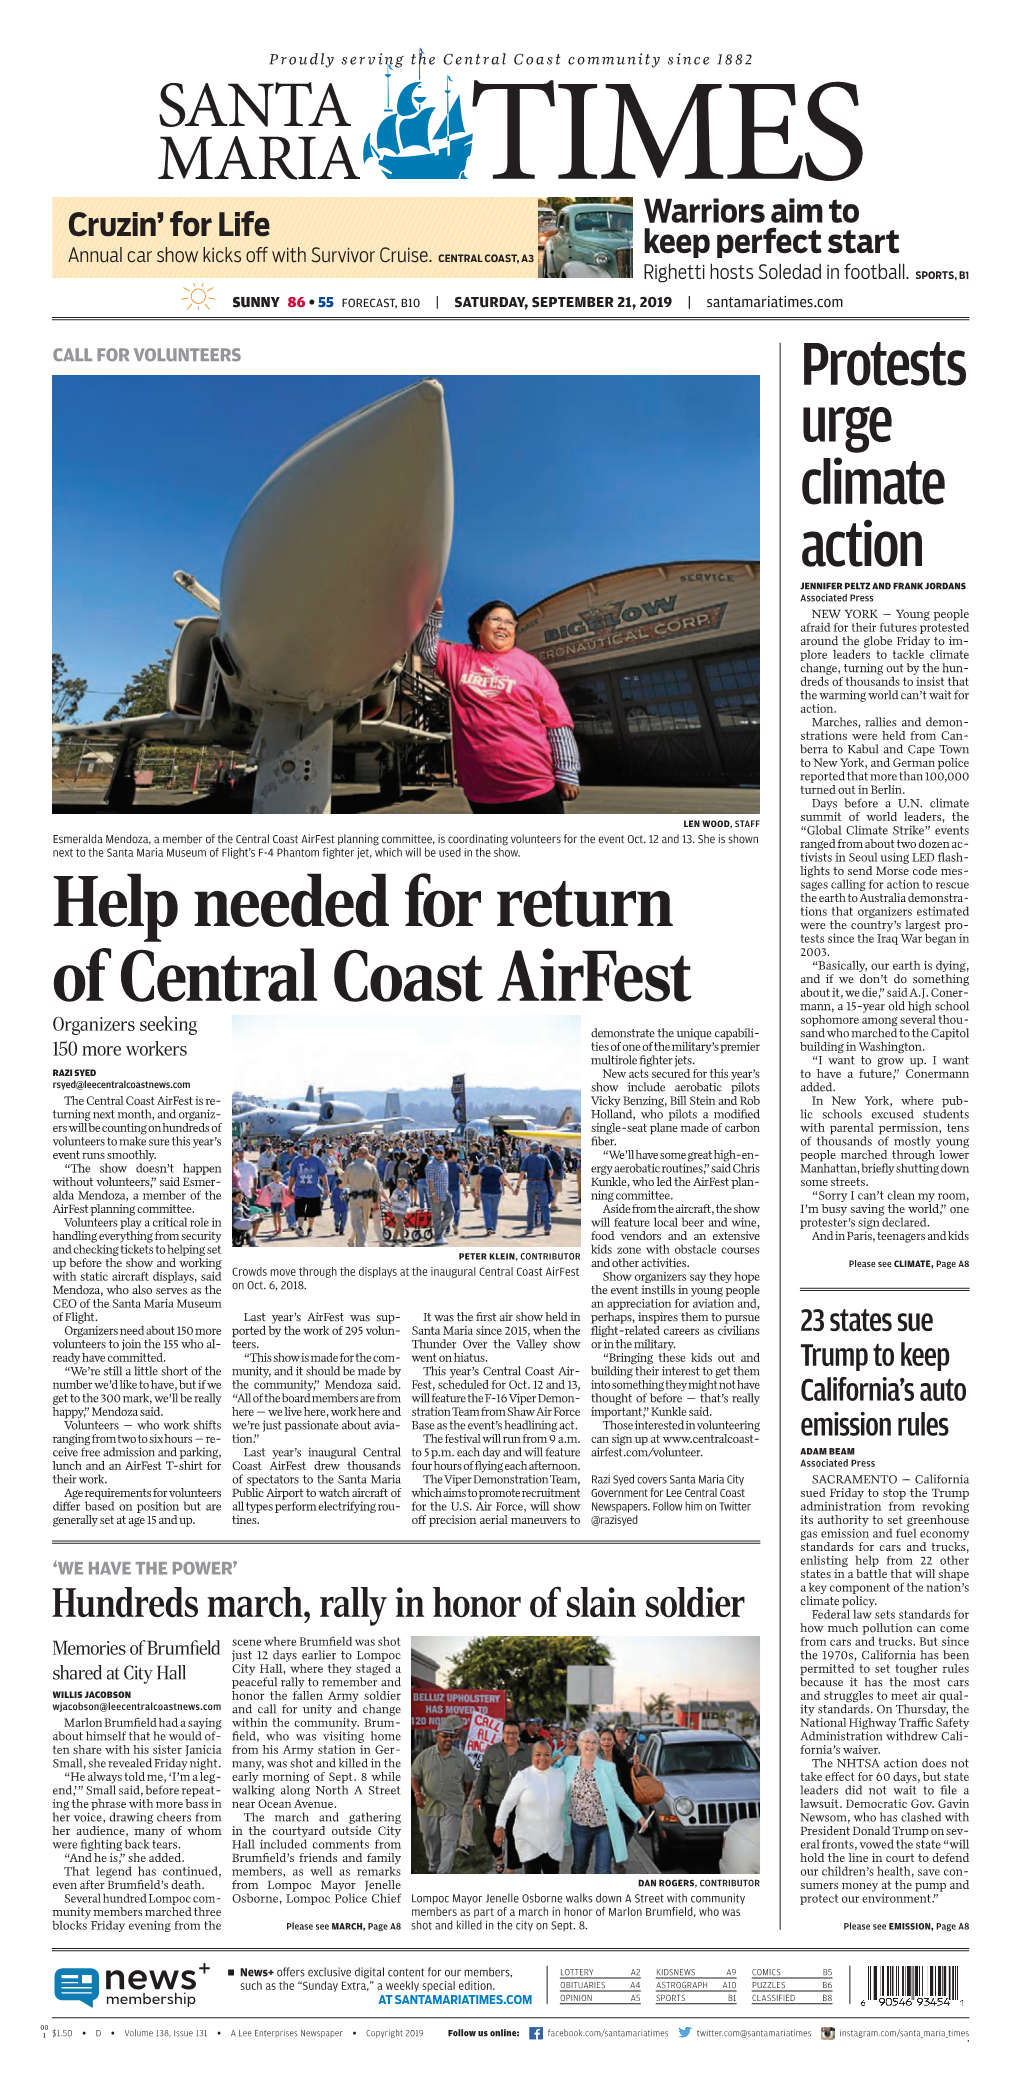 Help Needed for Return of Central Coast Airfest